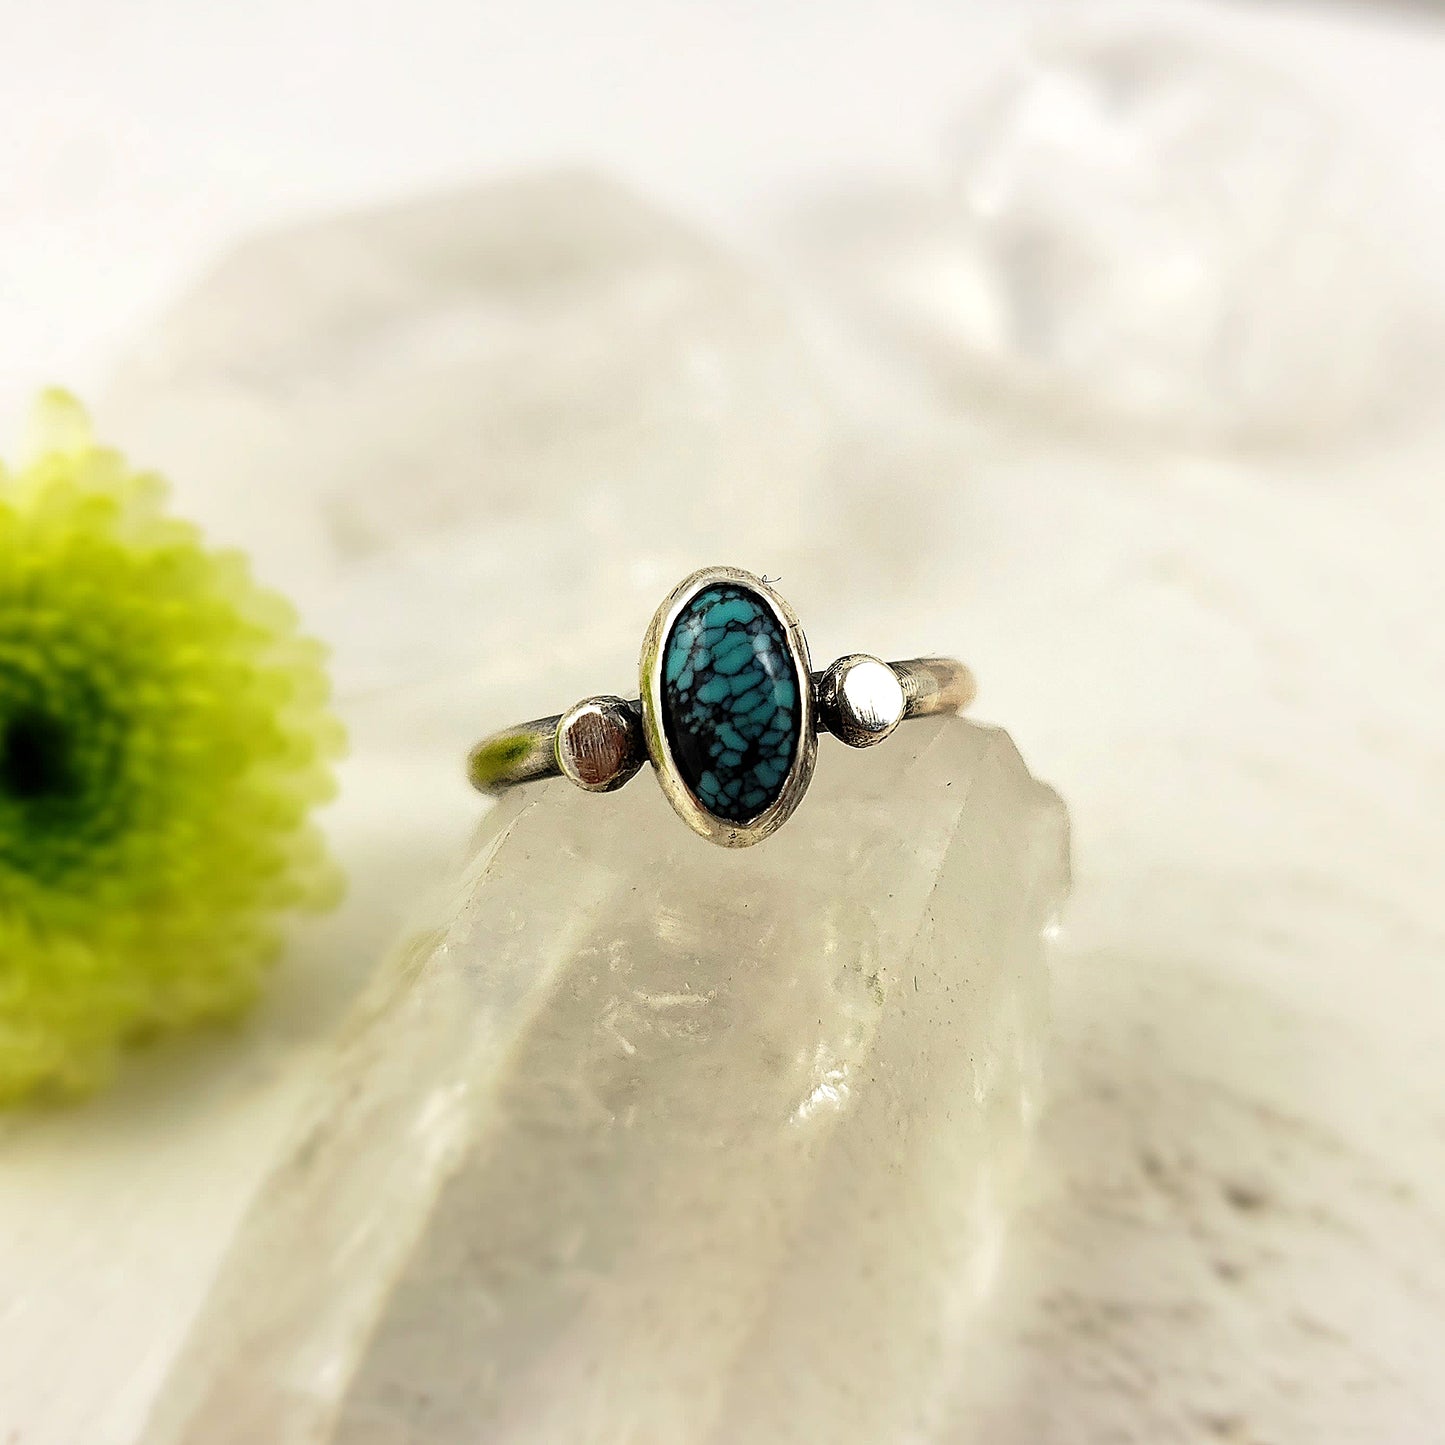 American Old Stock Turquoise Ring with Spheres